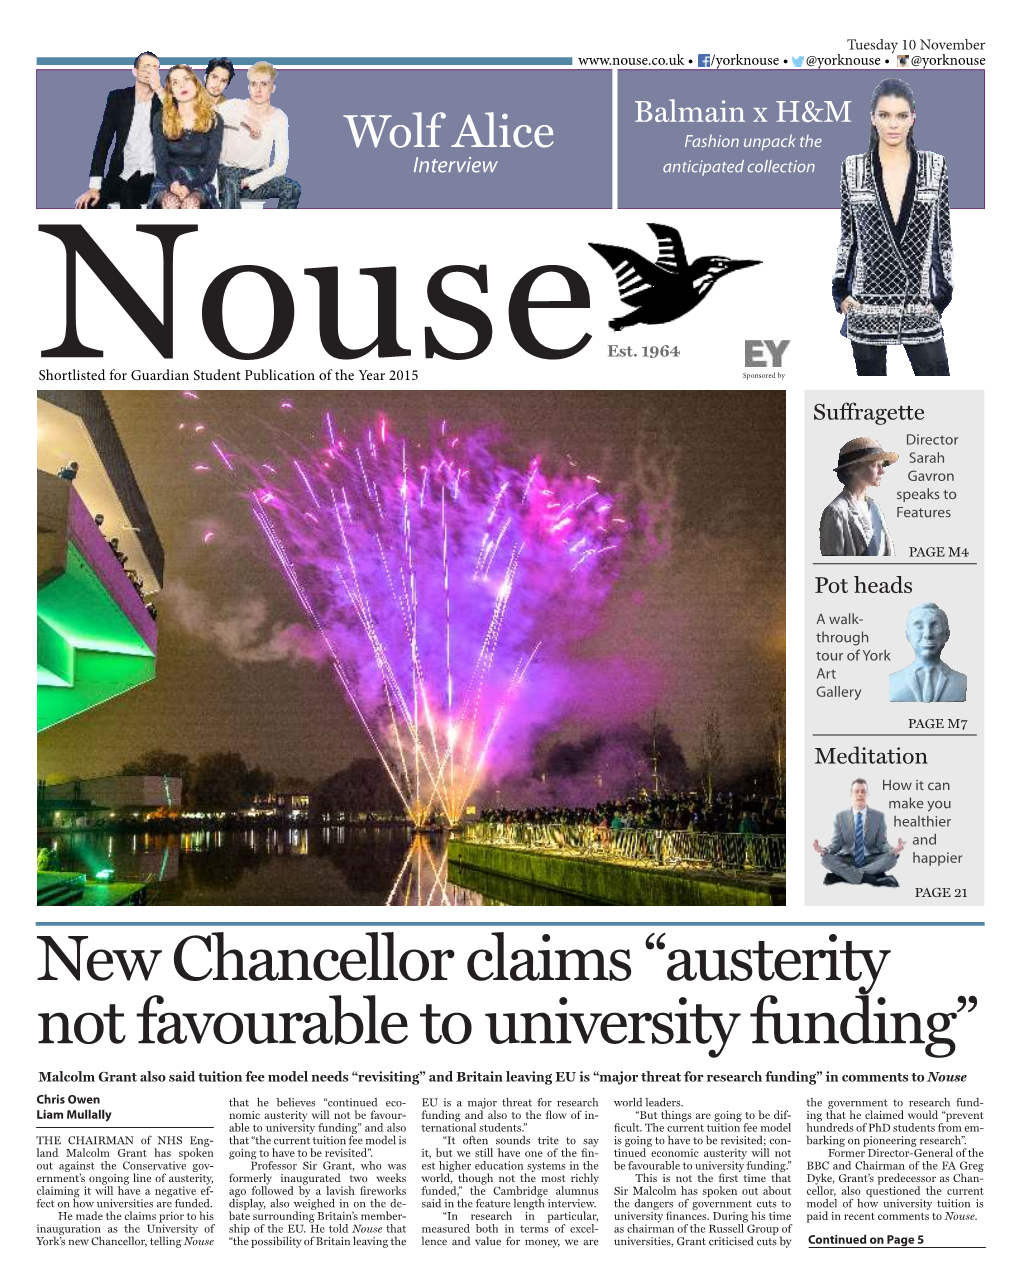 New Chancellor Claims “Austerity Not Favourable To